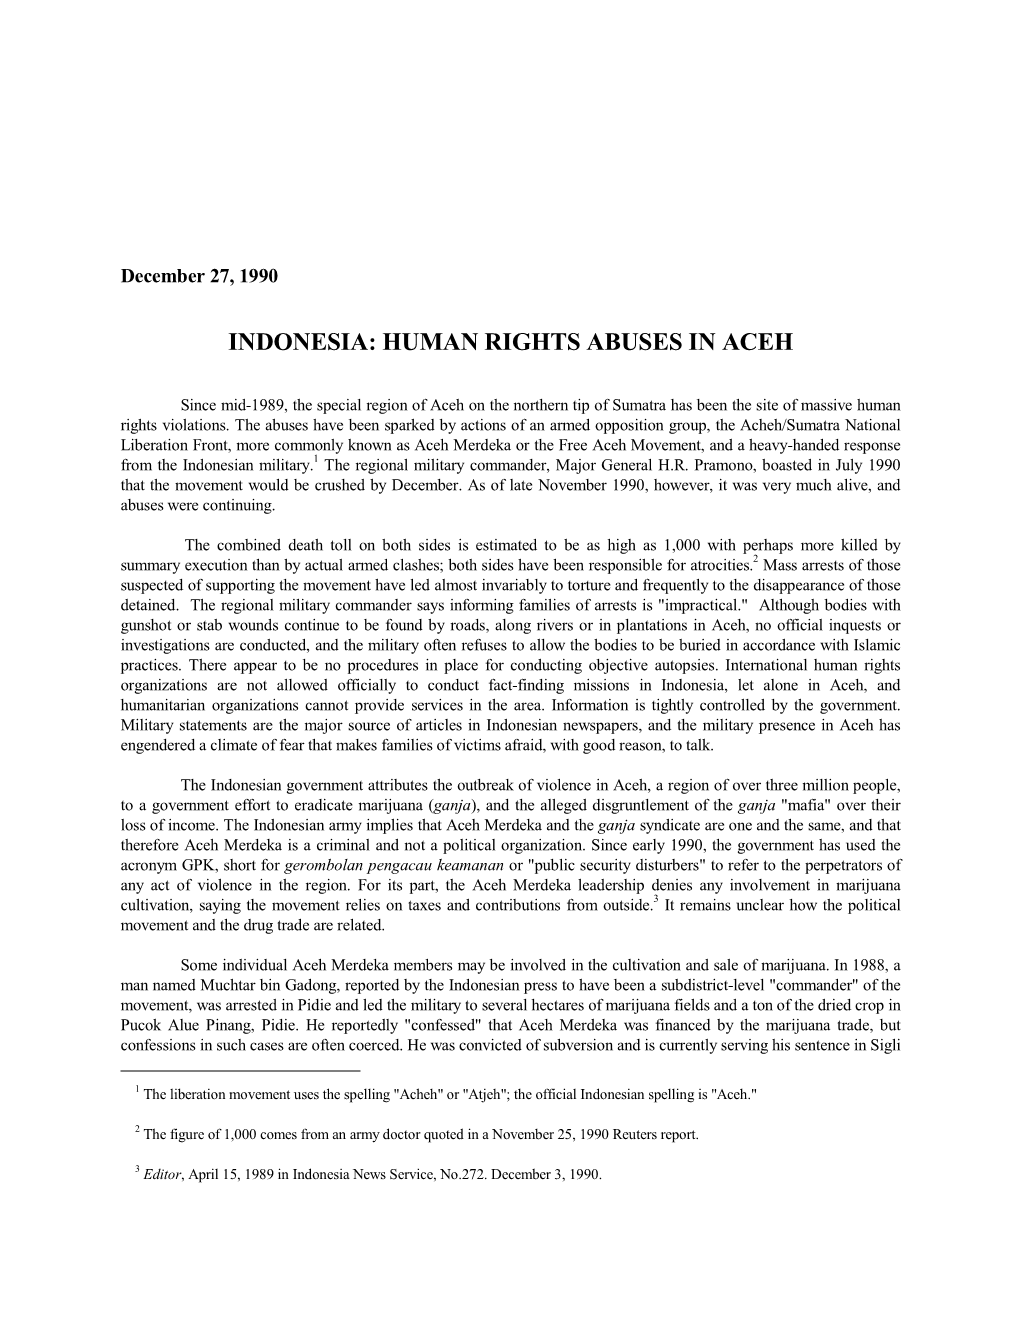 Indonesia: Human Rights Abuses in Aceh